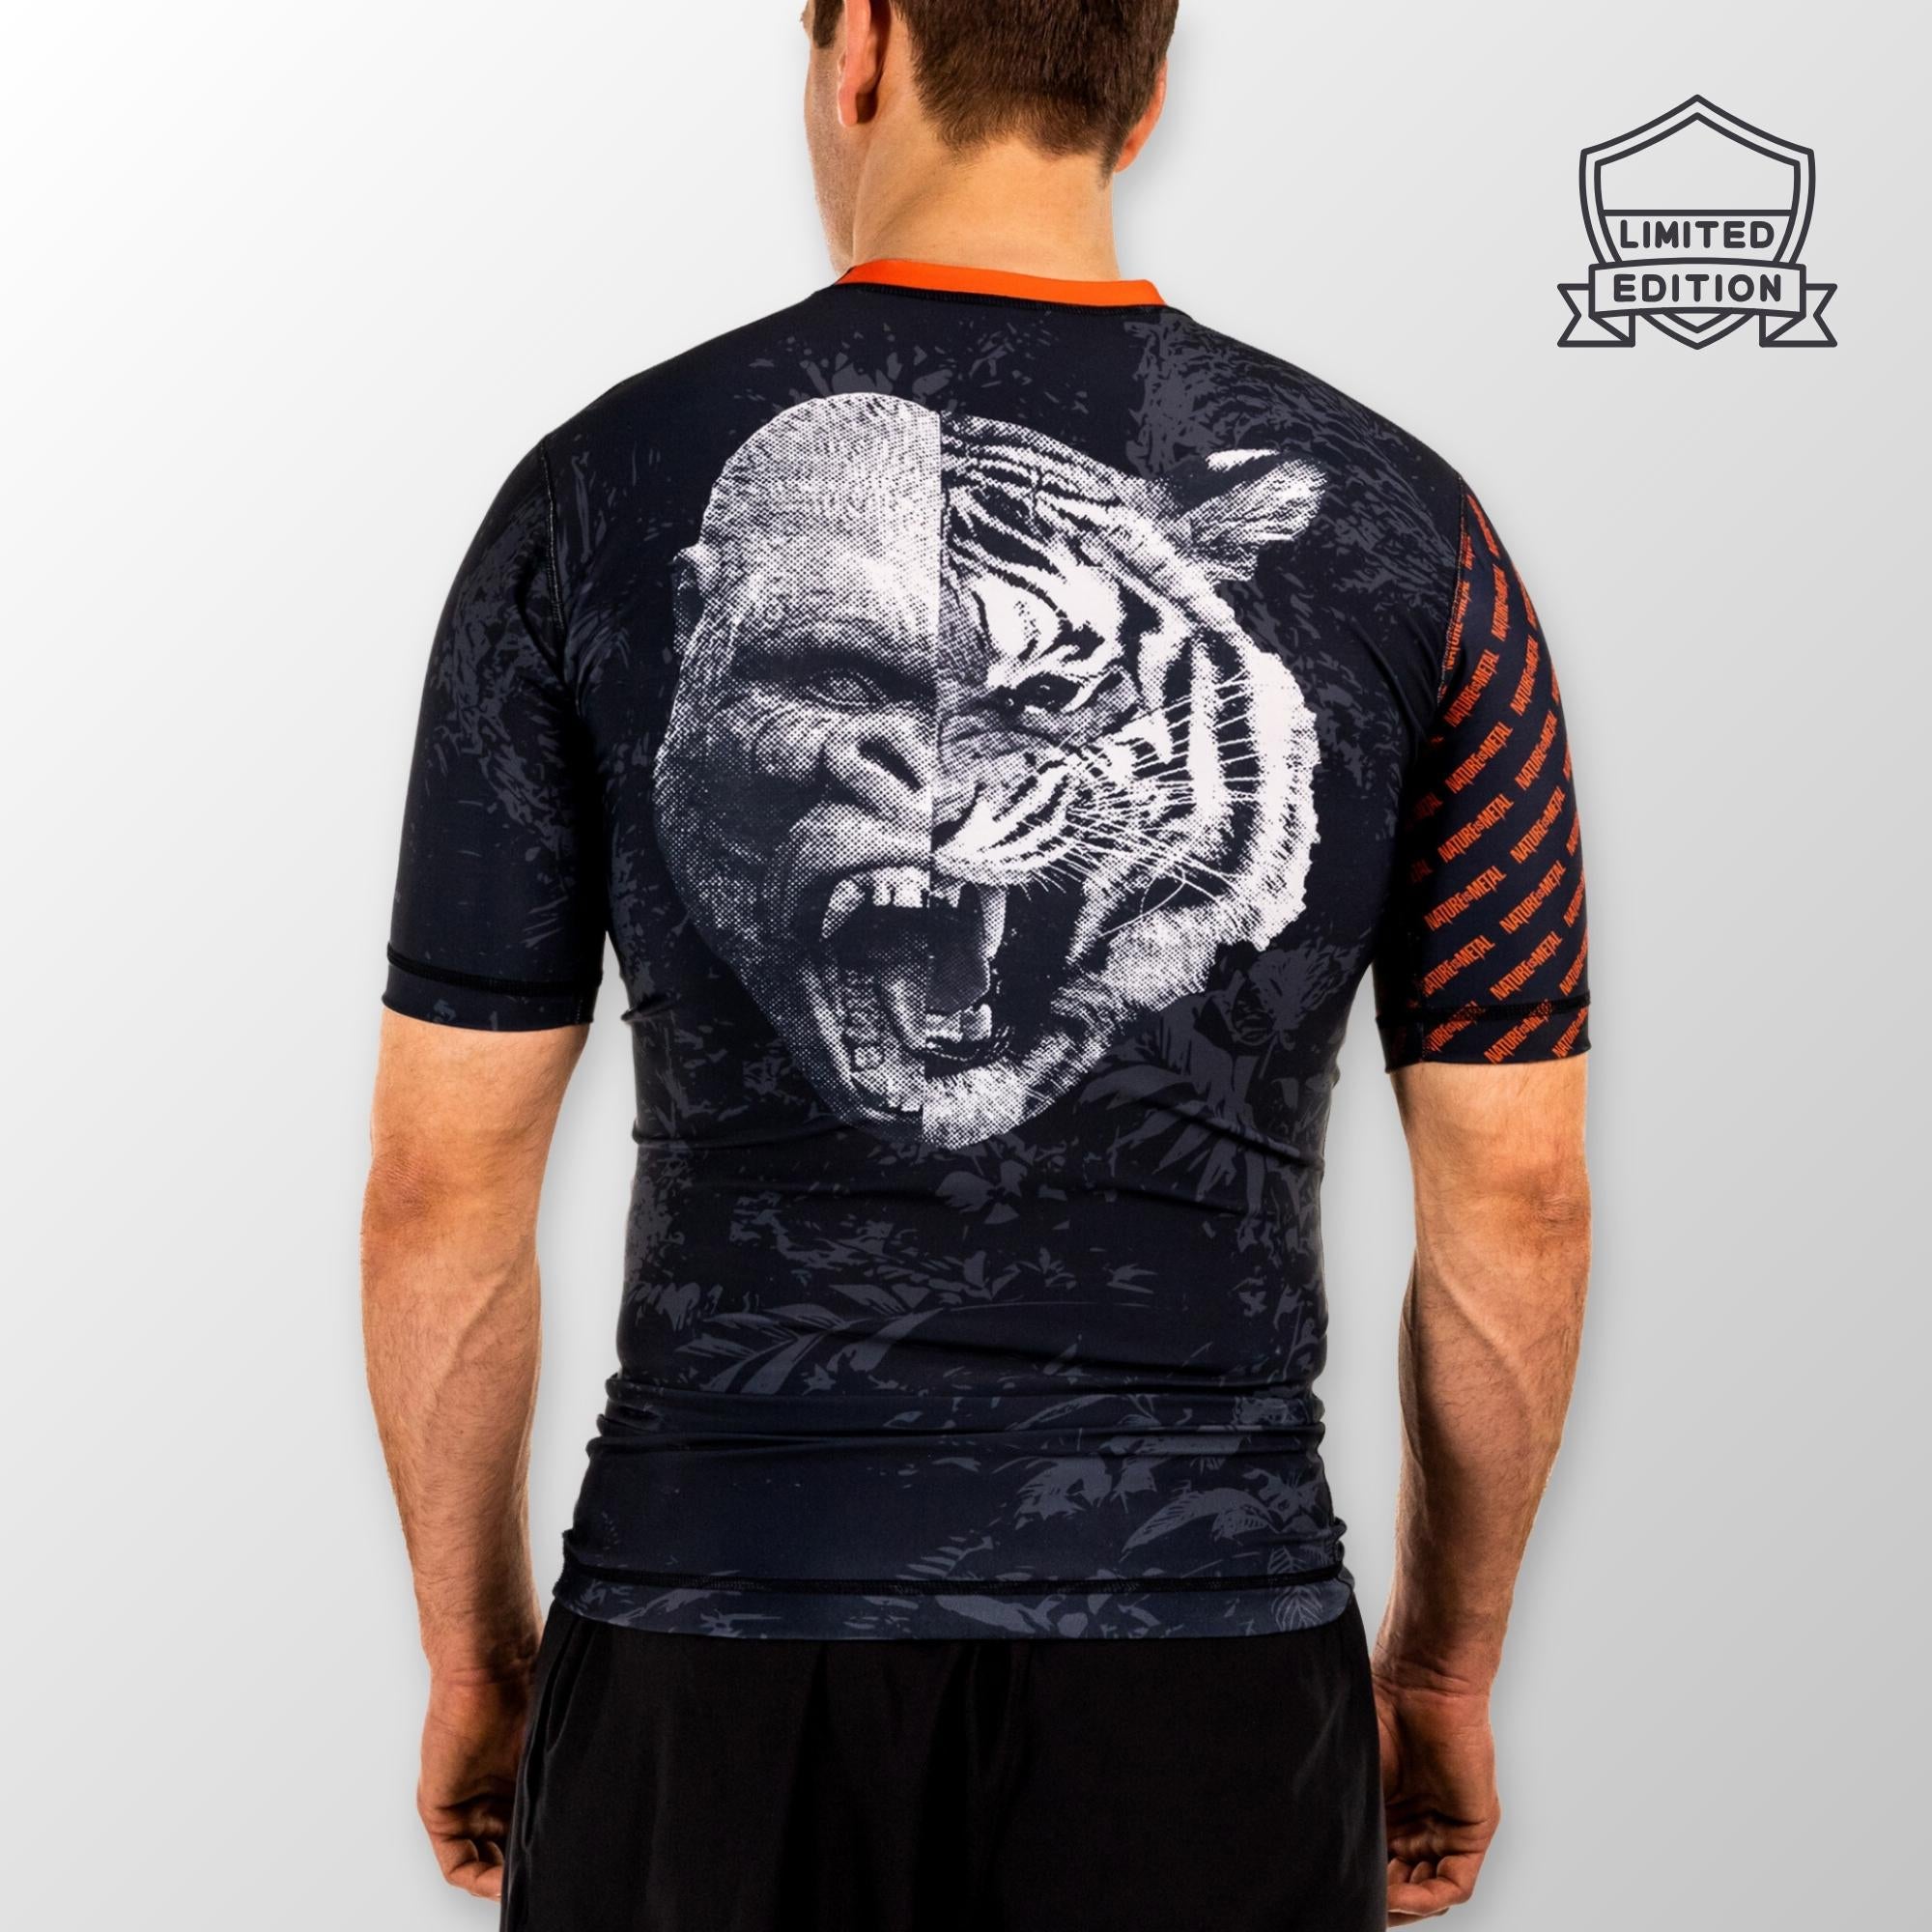 Nature is Metal x Origin - Fangs Out Rashguard - Compression Fit Short Sleeve